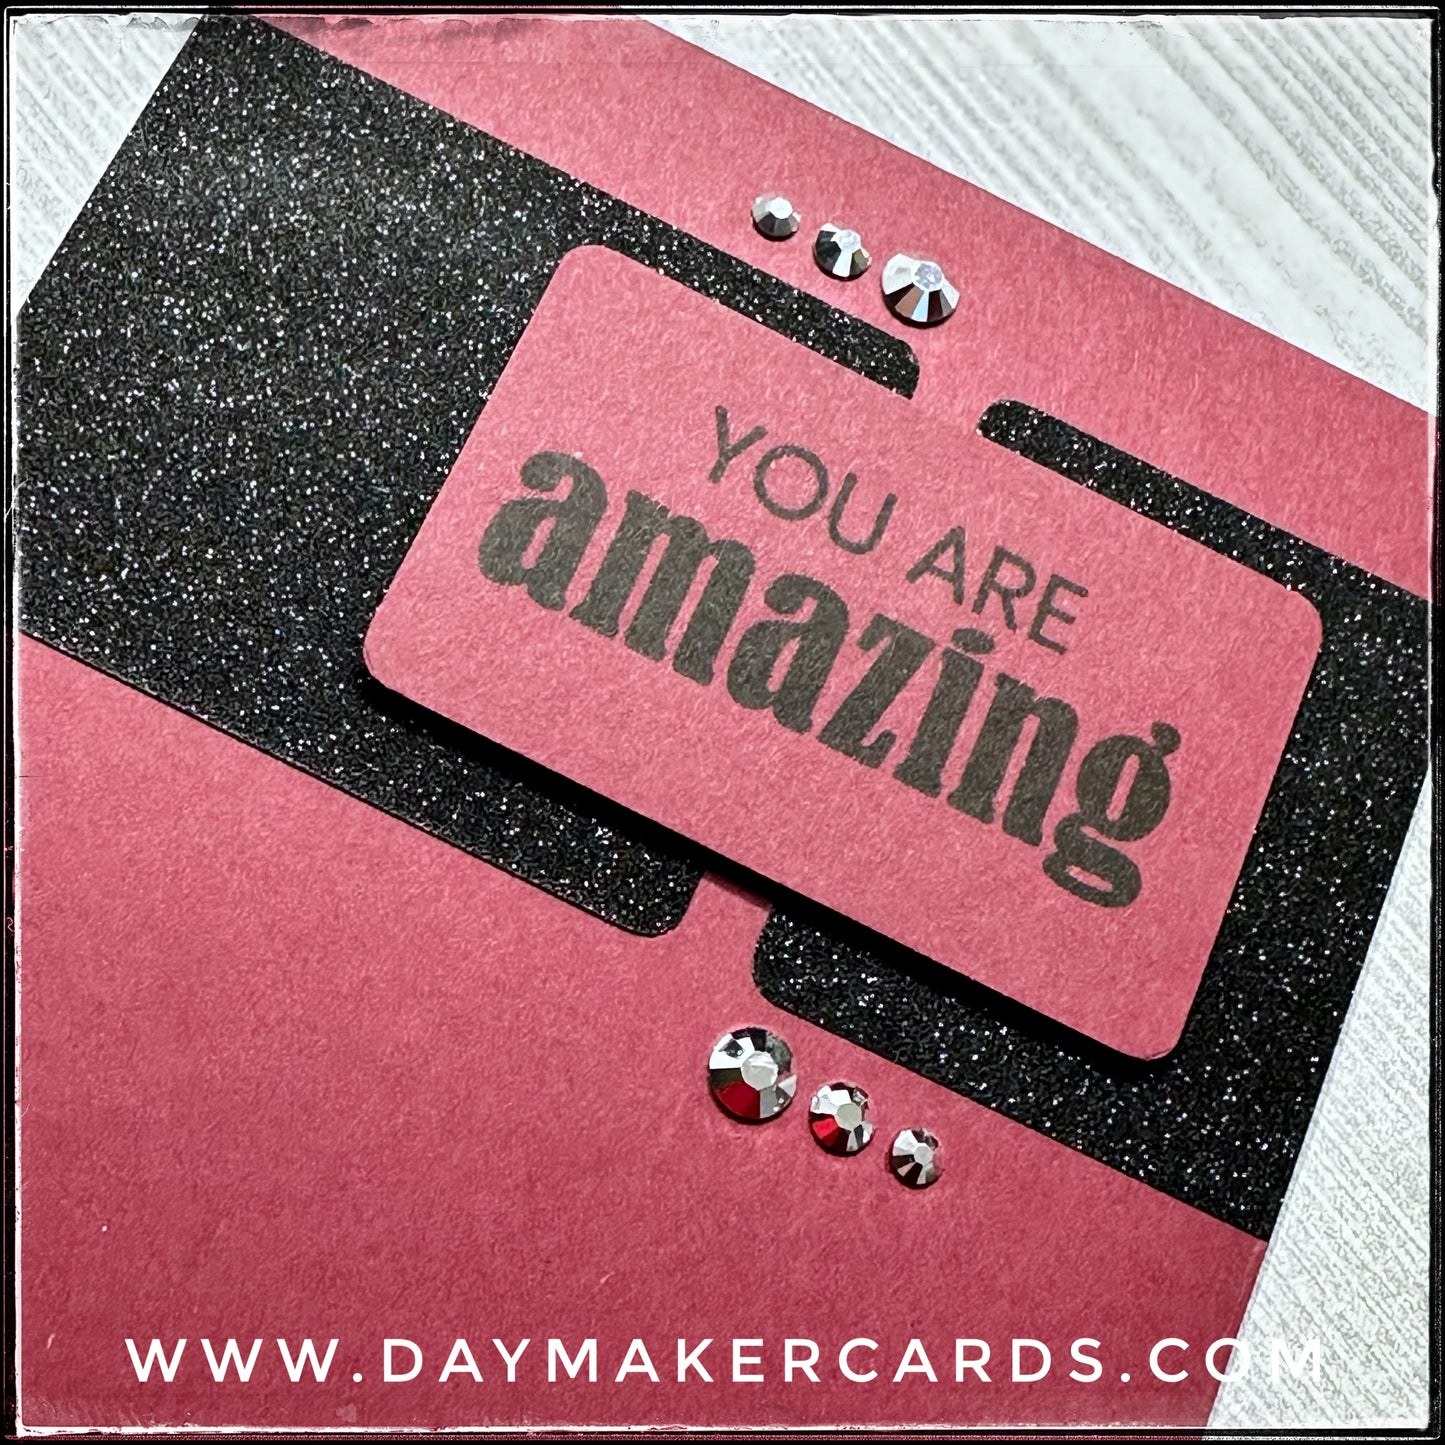 You Are Amazing Handmade Card